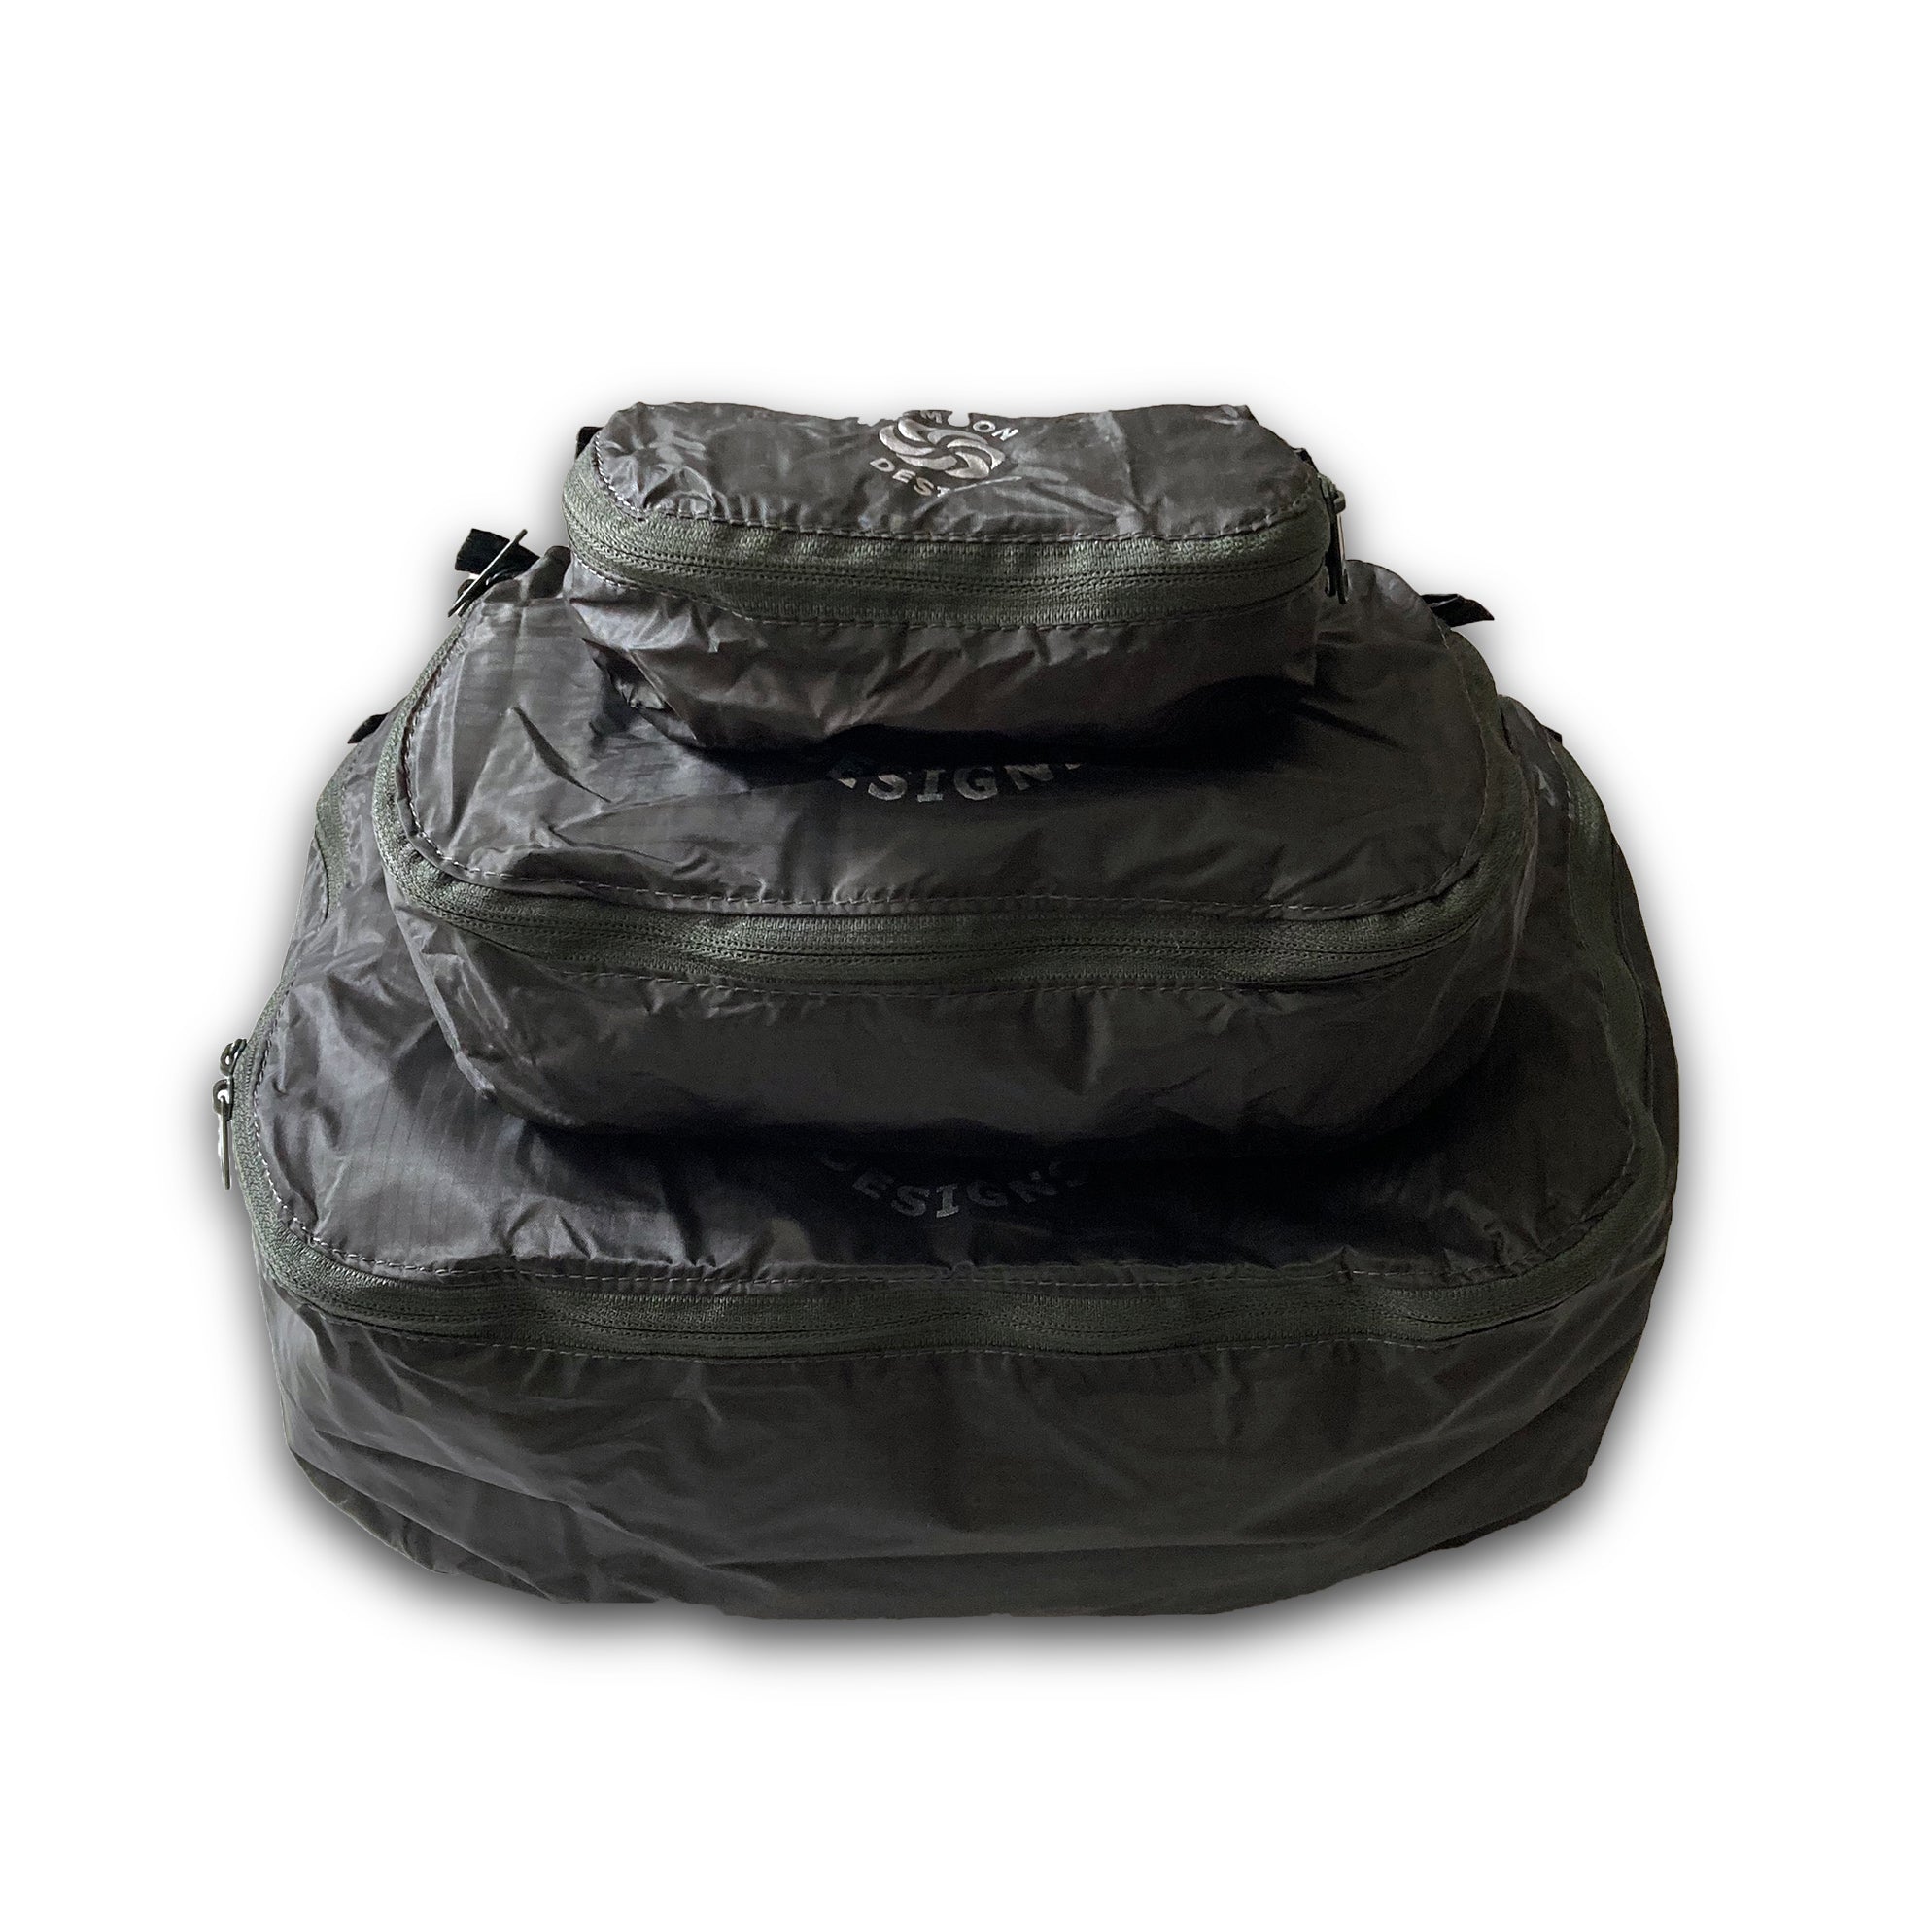 Carbon Six Moon Designs Pack Pod stuff sacks in all three sizes stacked